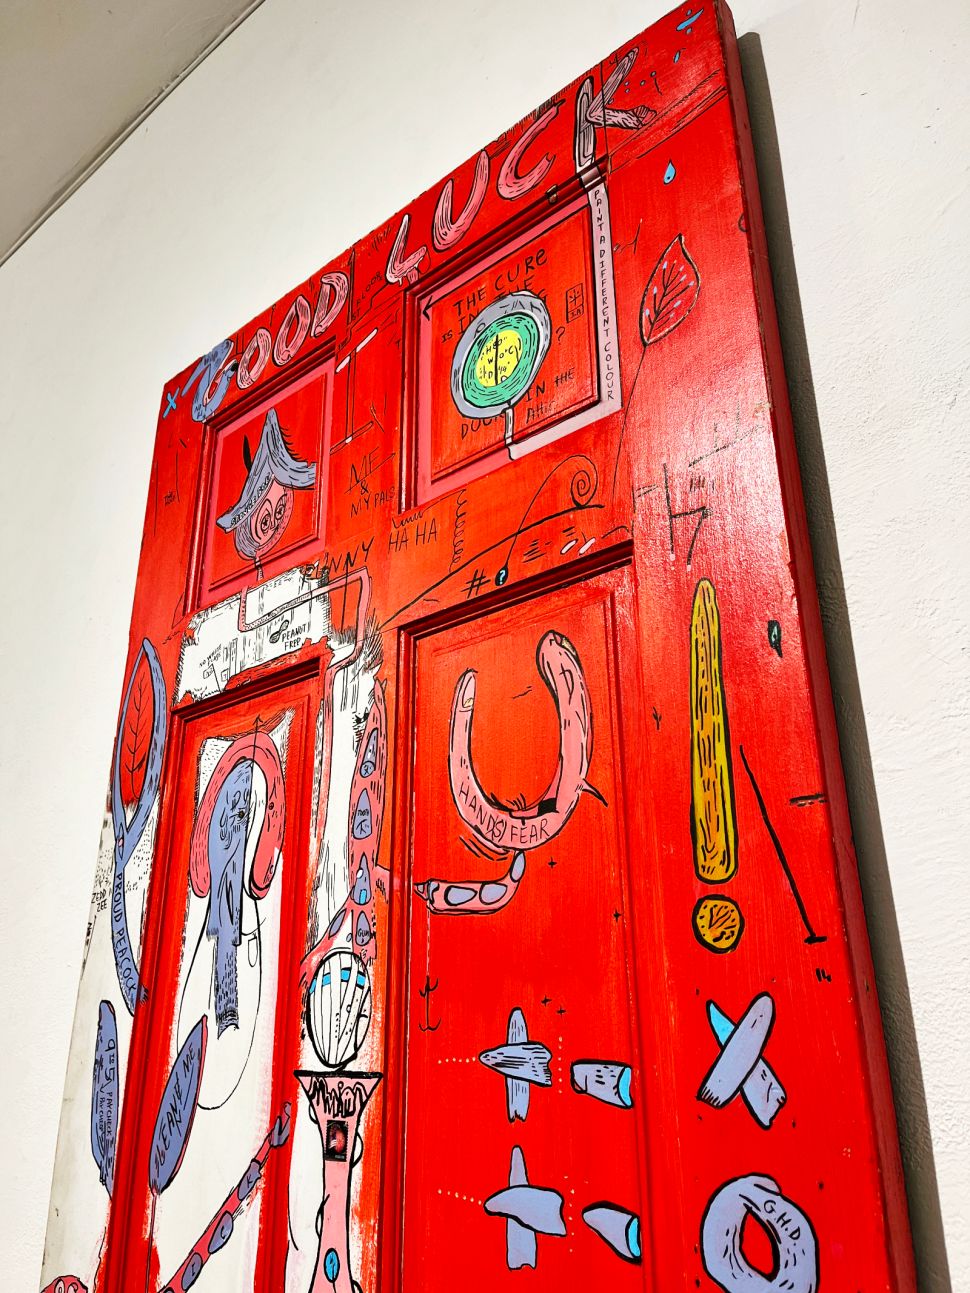 A red door painted with various motifs